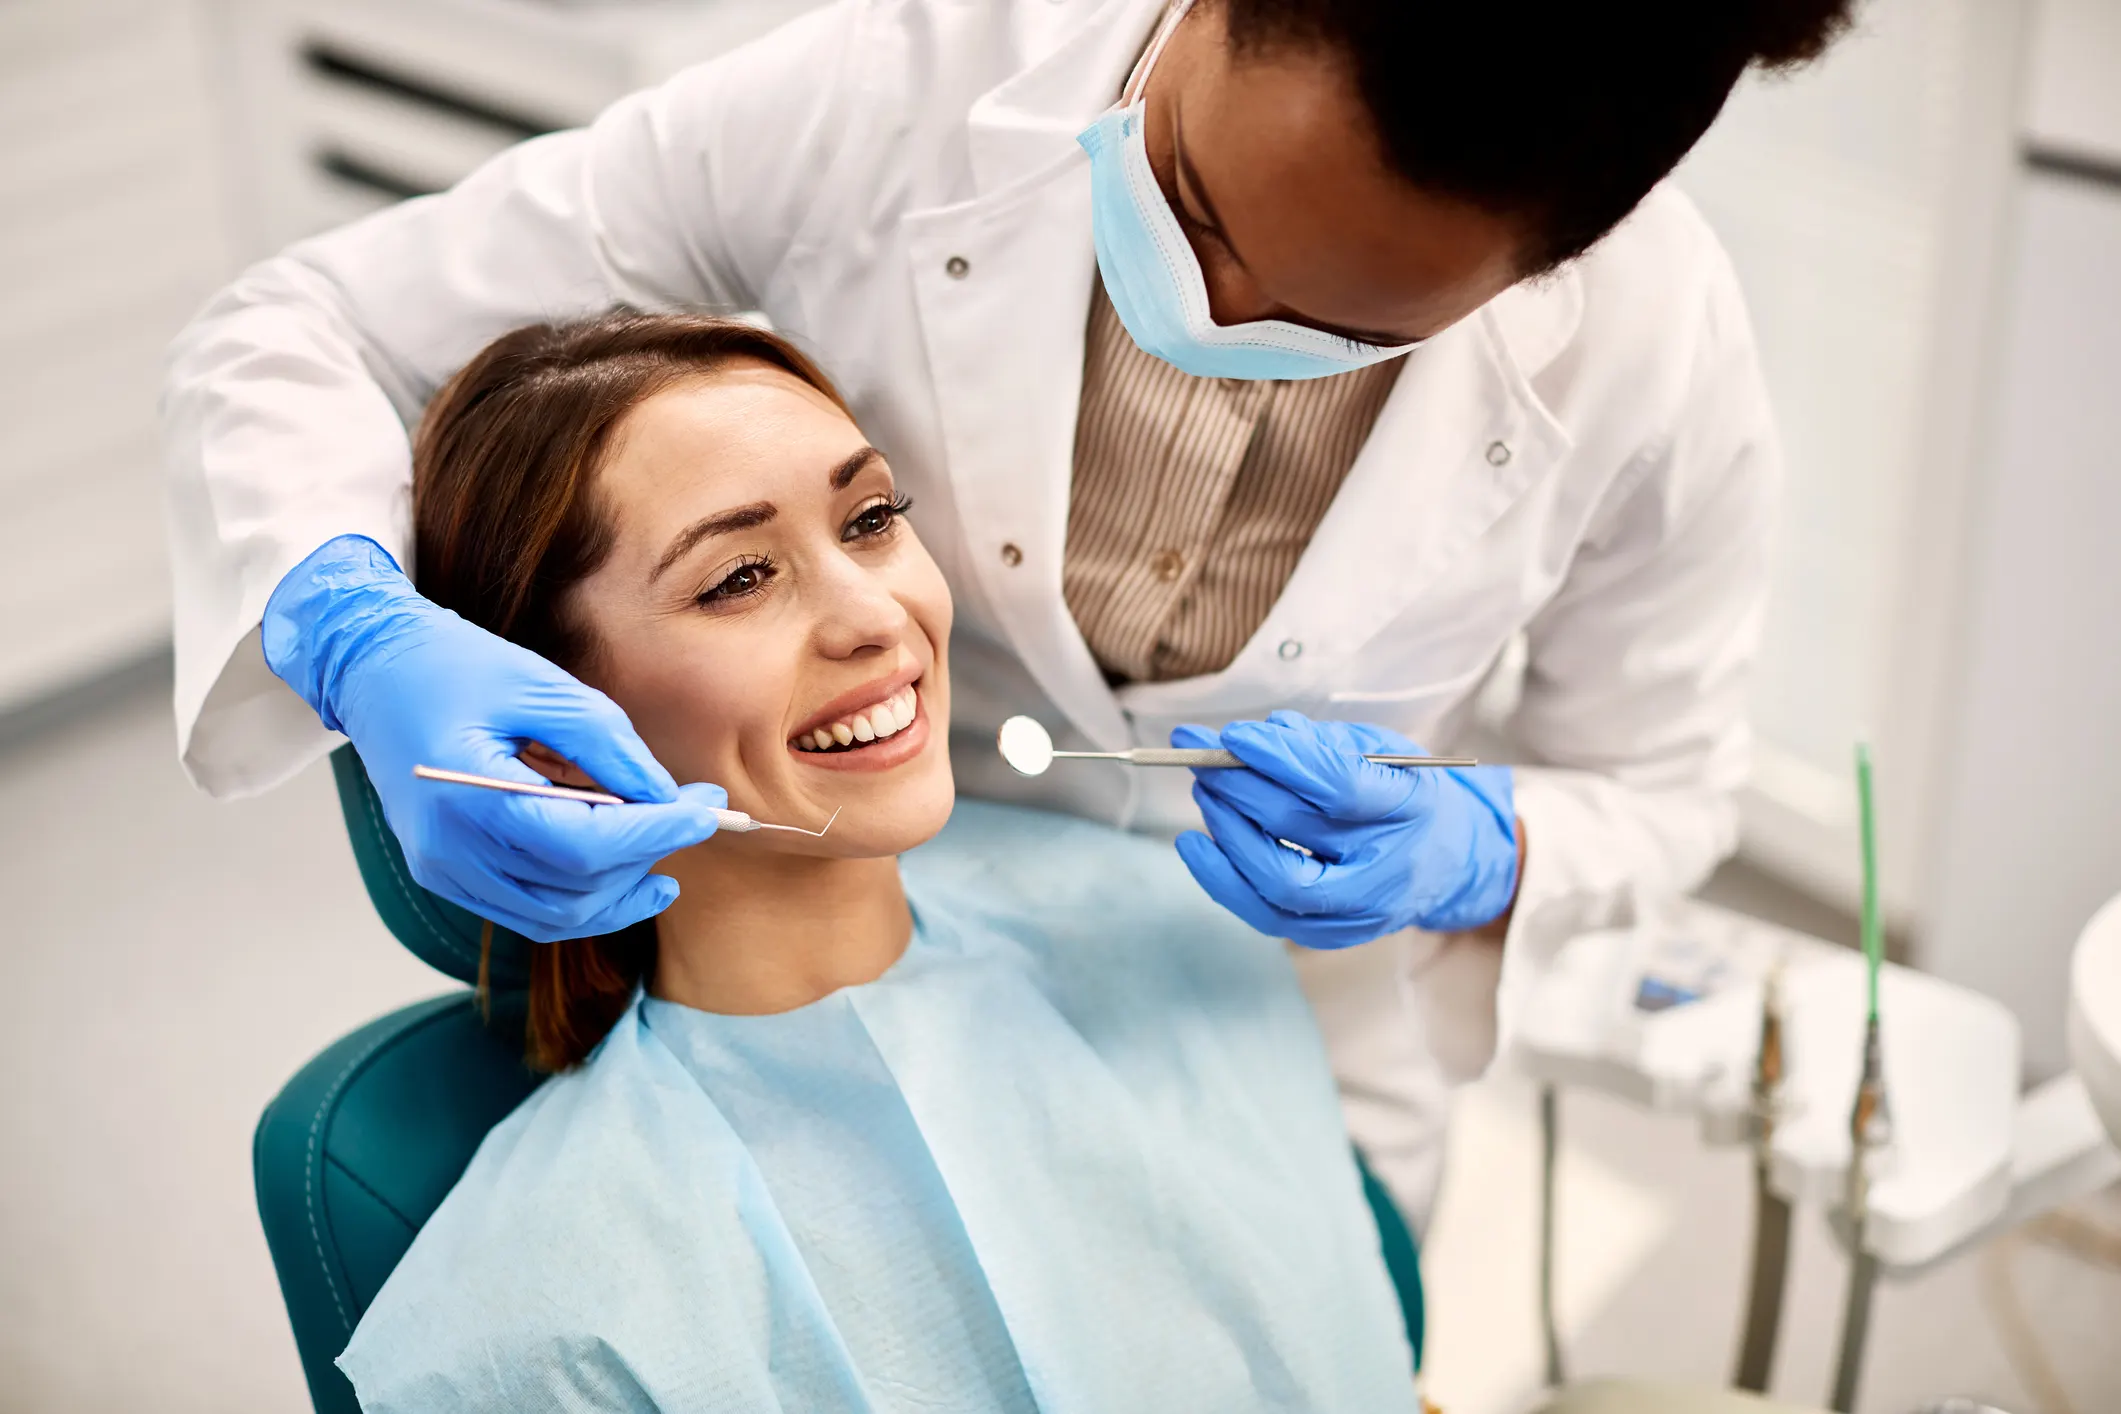 Orthodontic Scheduling A Key to Practice Growth and Patient Satisfaction